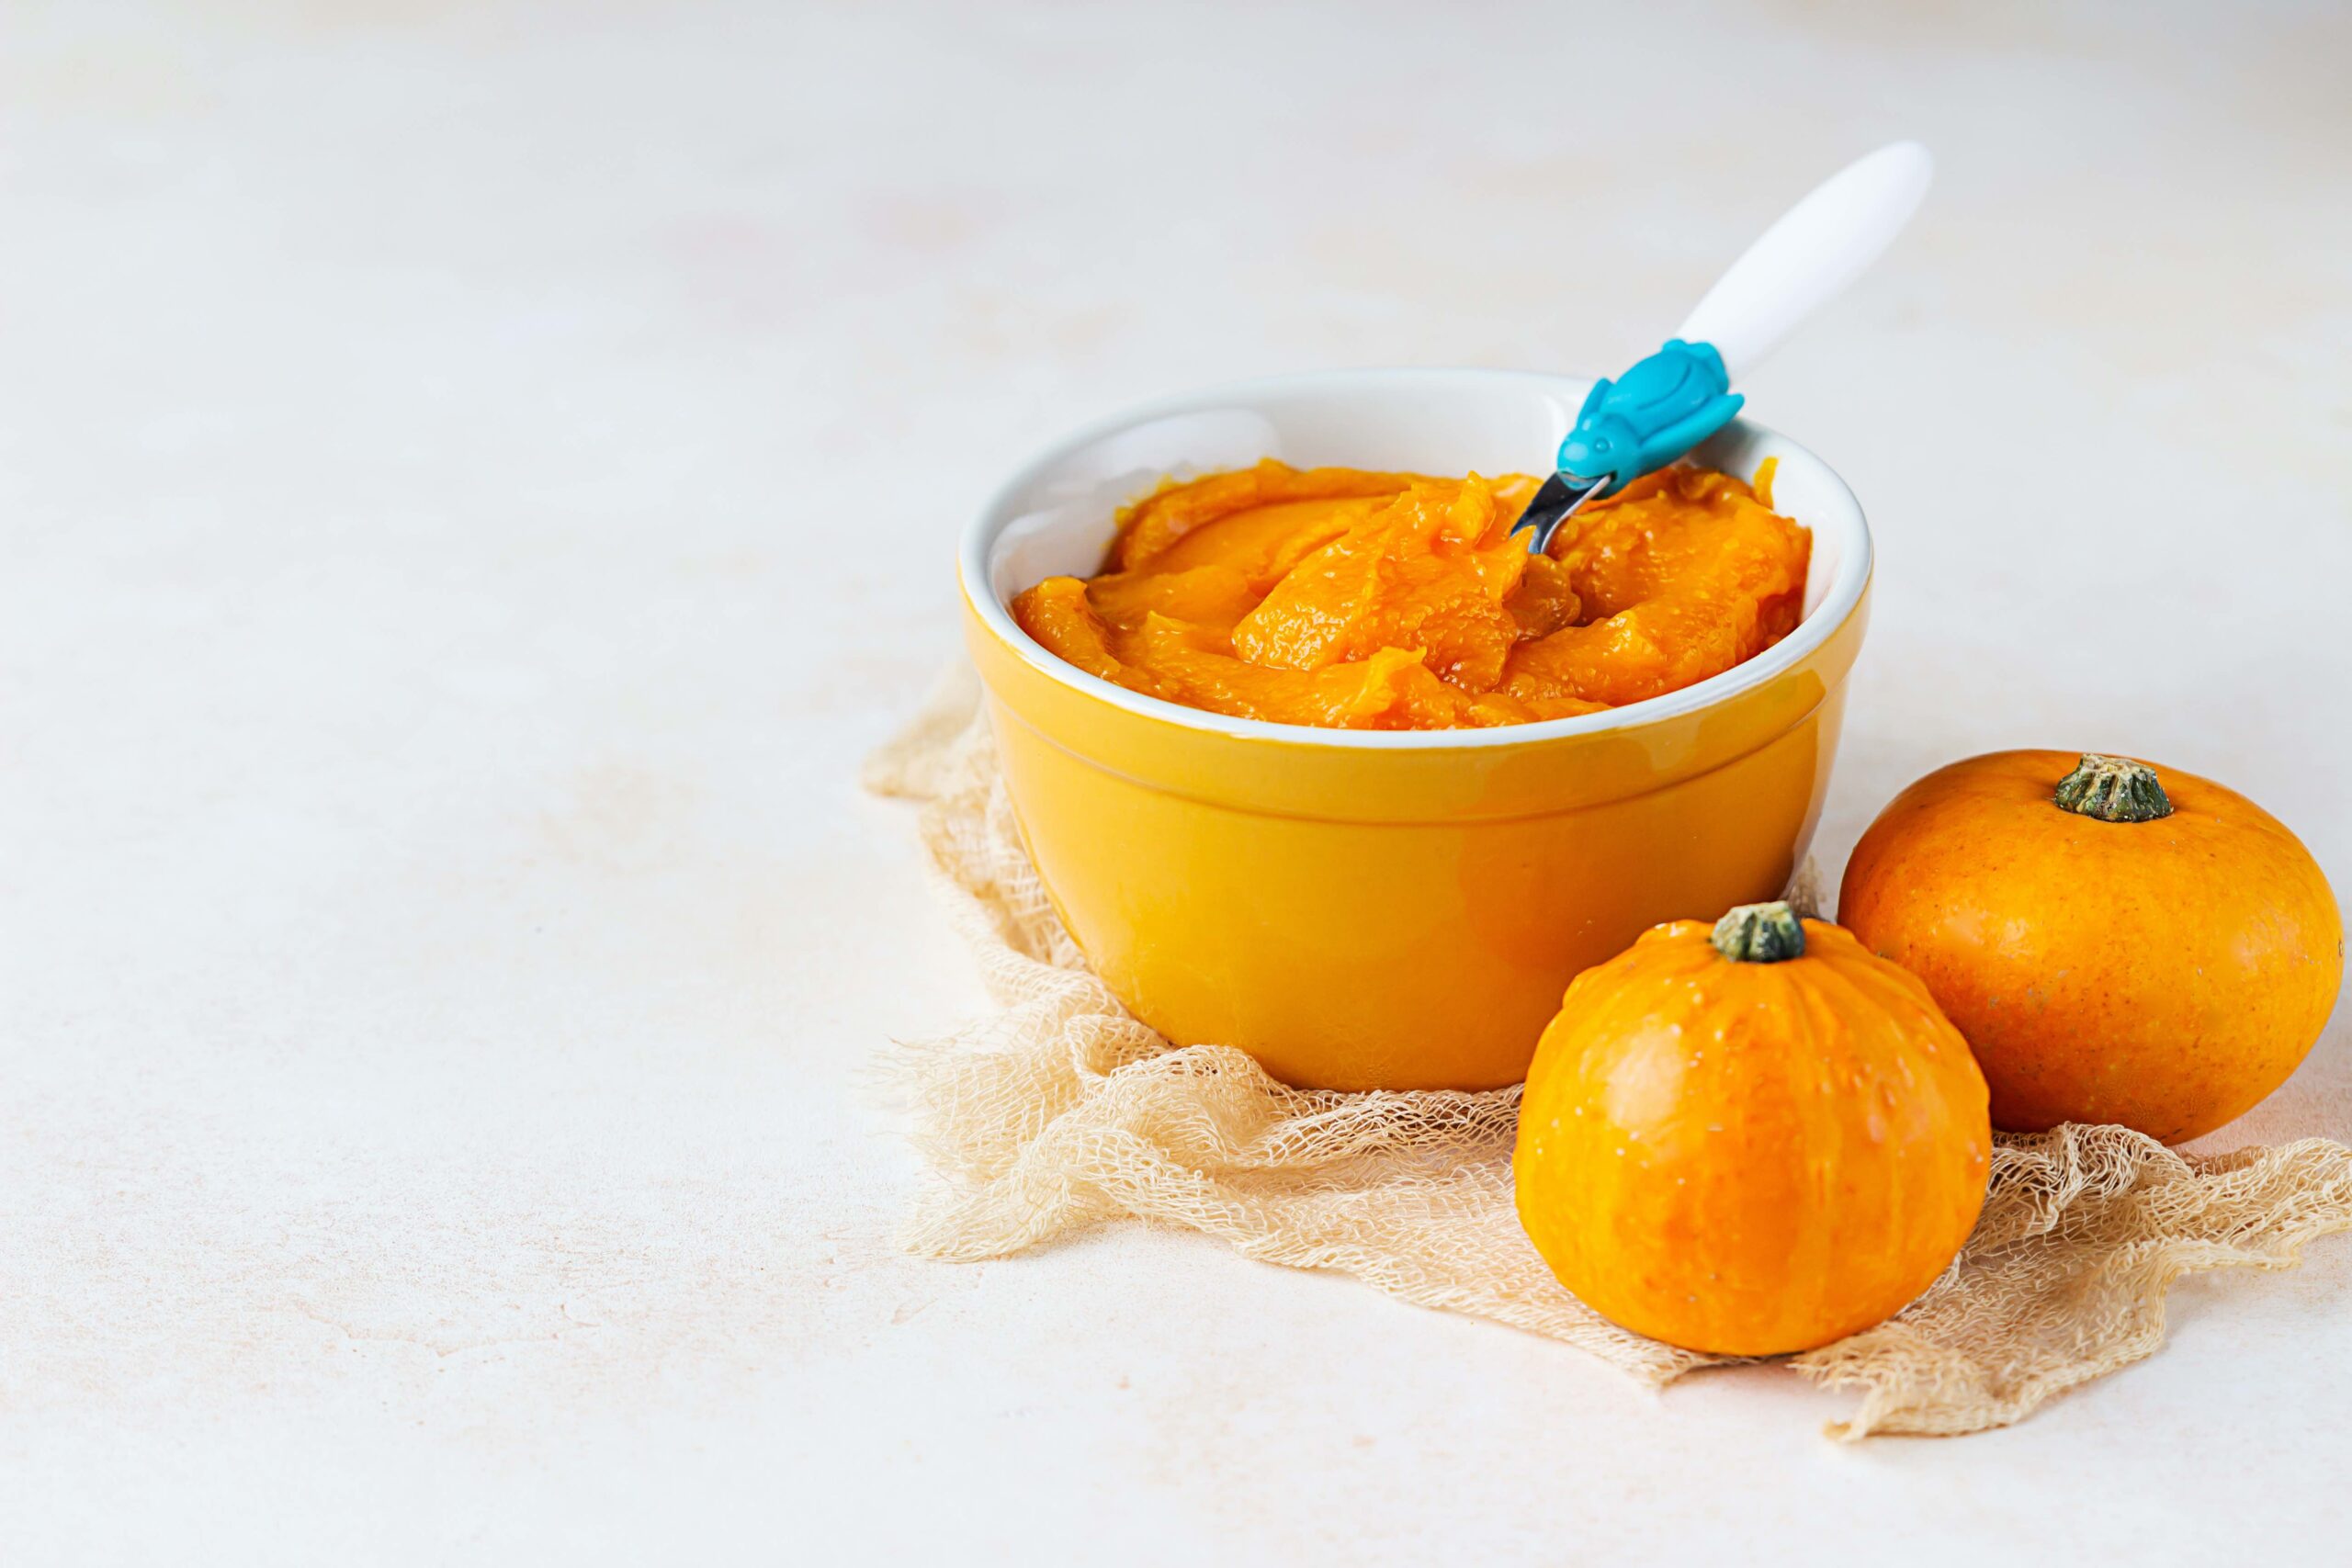 Homemade pumpkin puree in bowl with baby spoon and fresh pumpkins on light background. The concept of baby food.